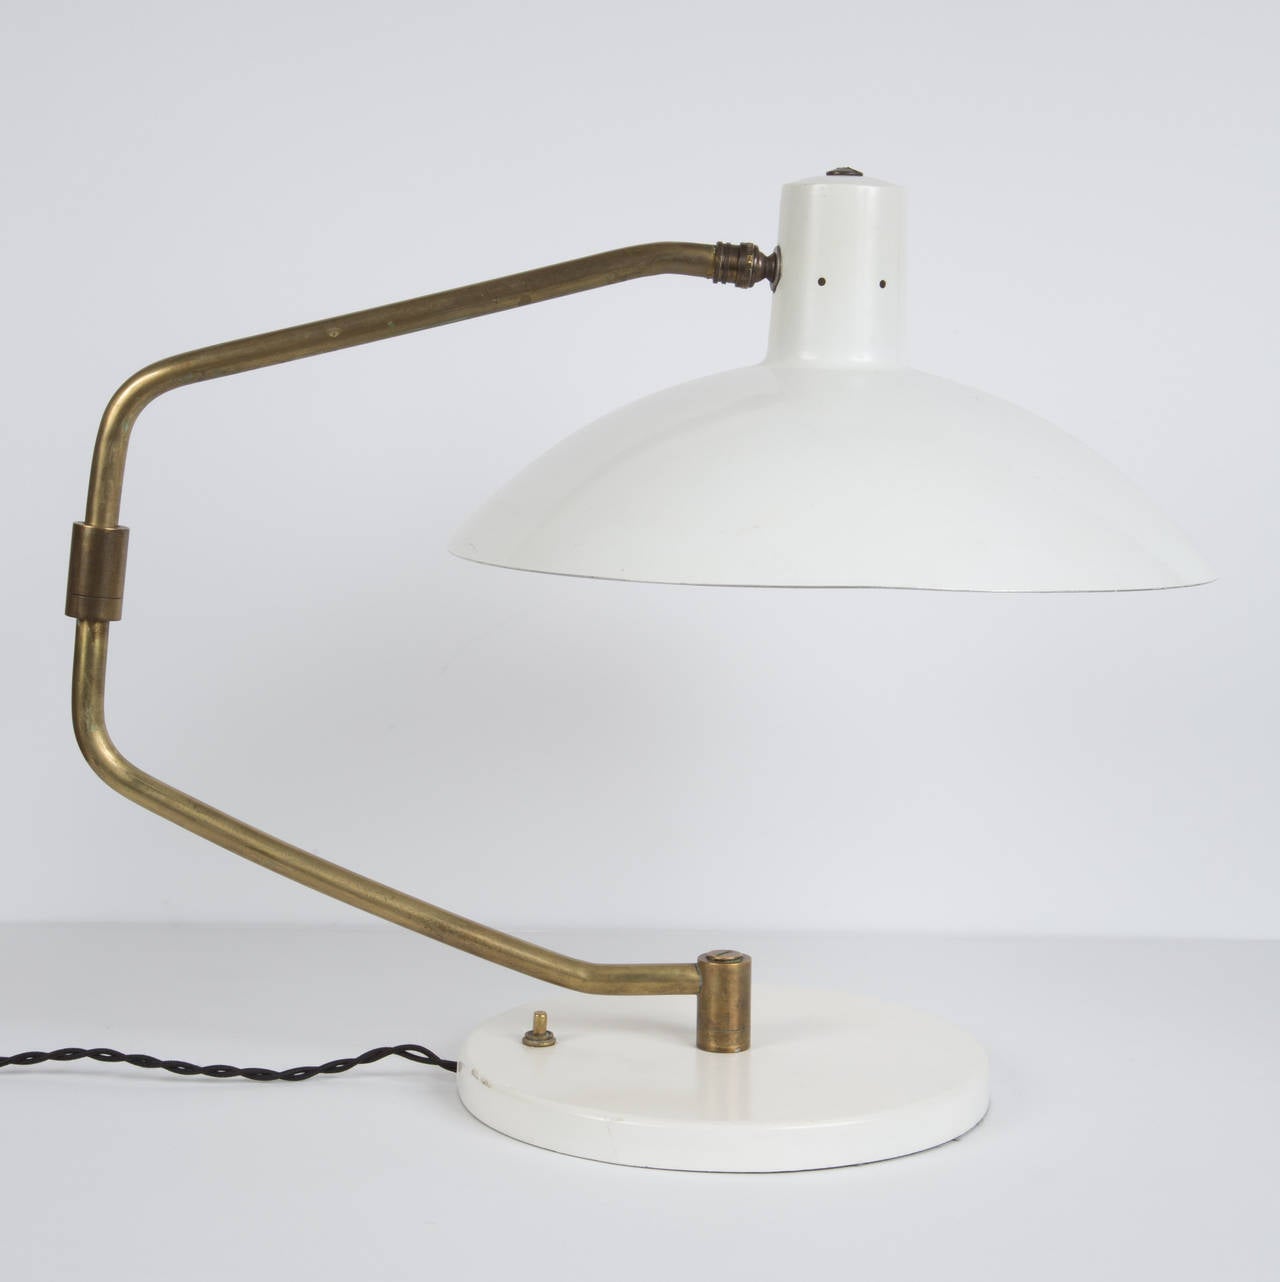 White enamel and brass. Adjustable arm and shade.